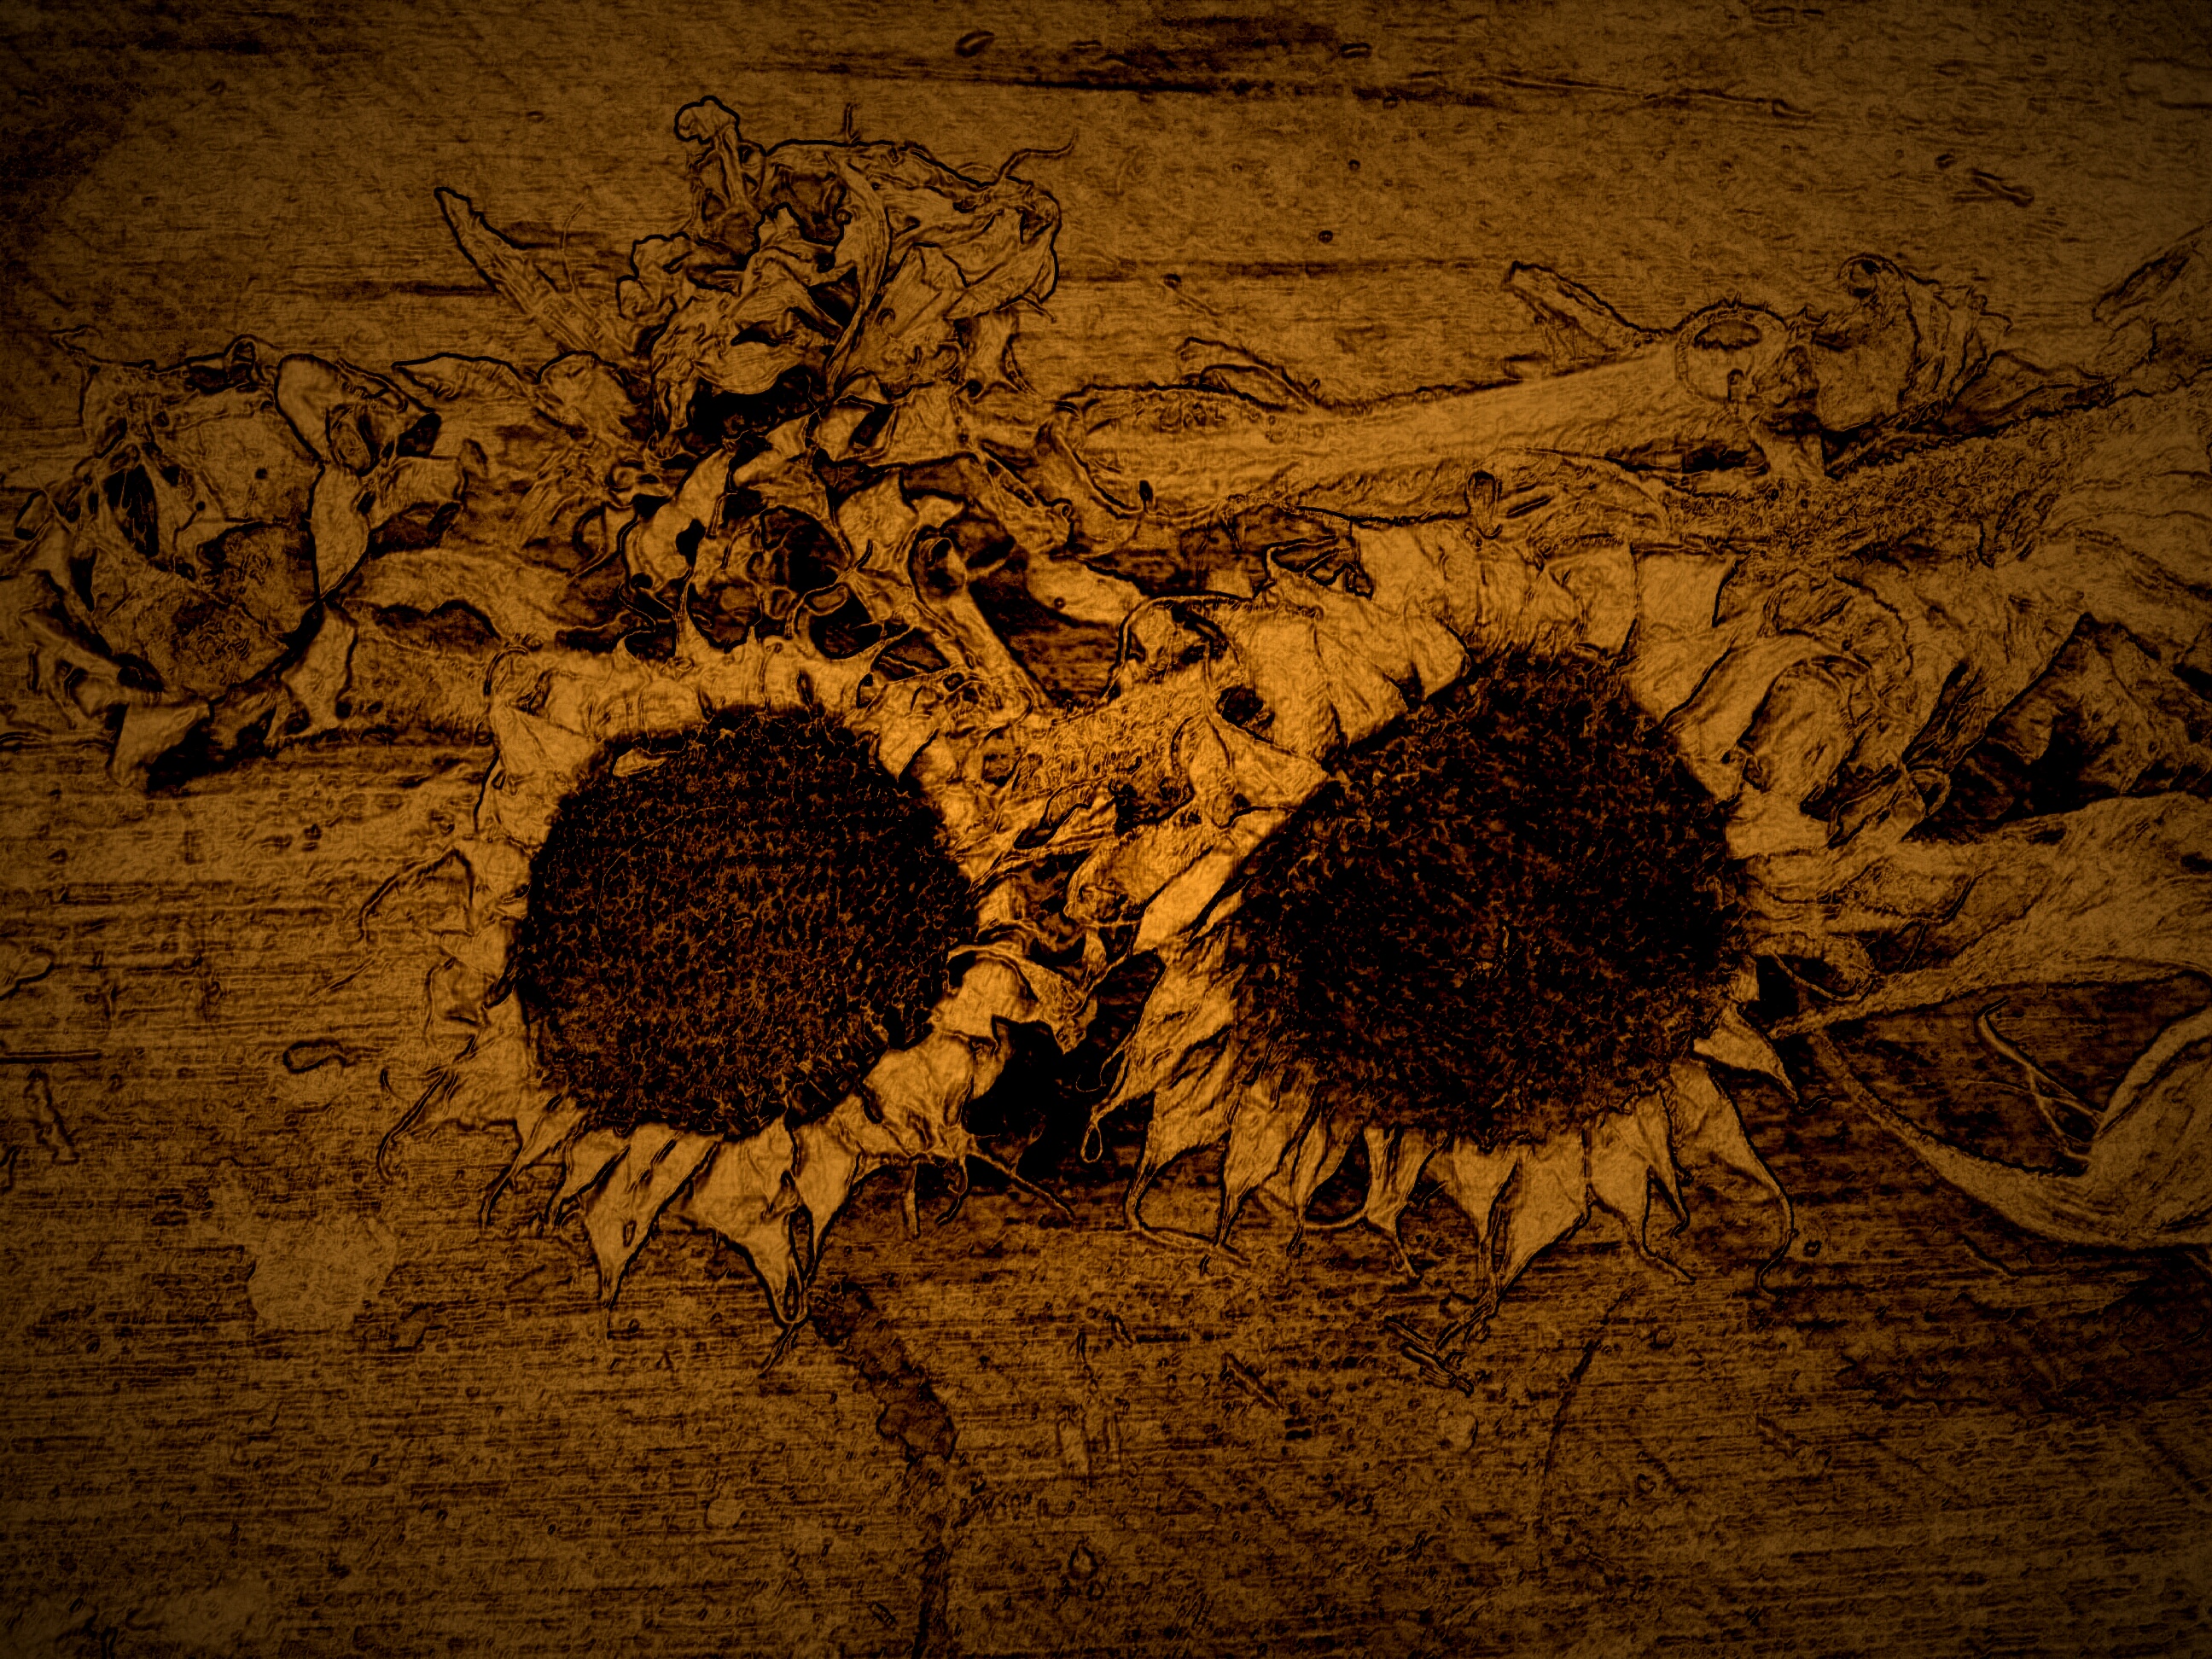 Dried sunflowers, Hilmi Baskurt, pencil, charcoal, shellac and ink, 2016